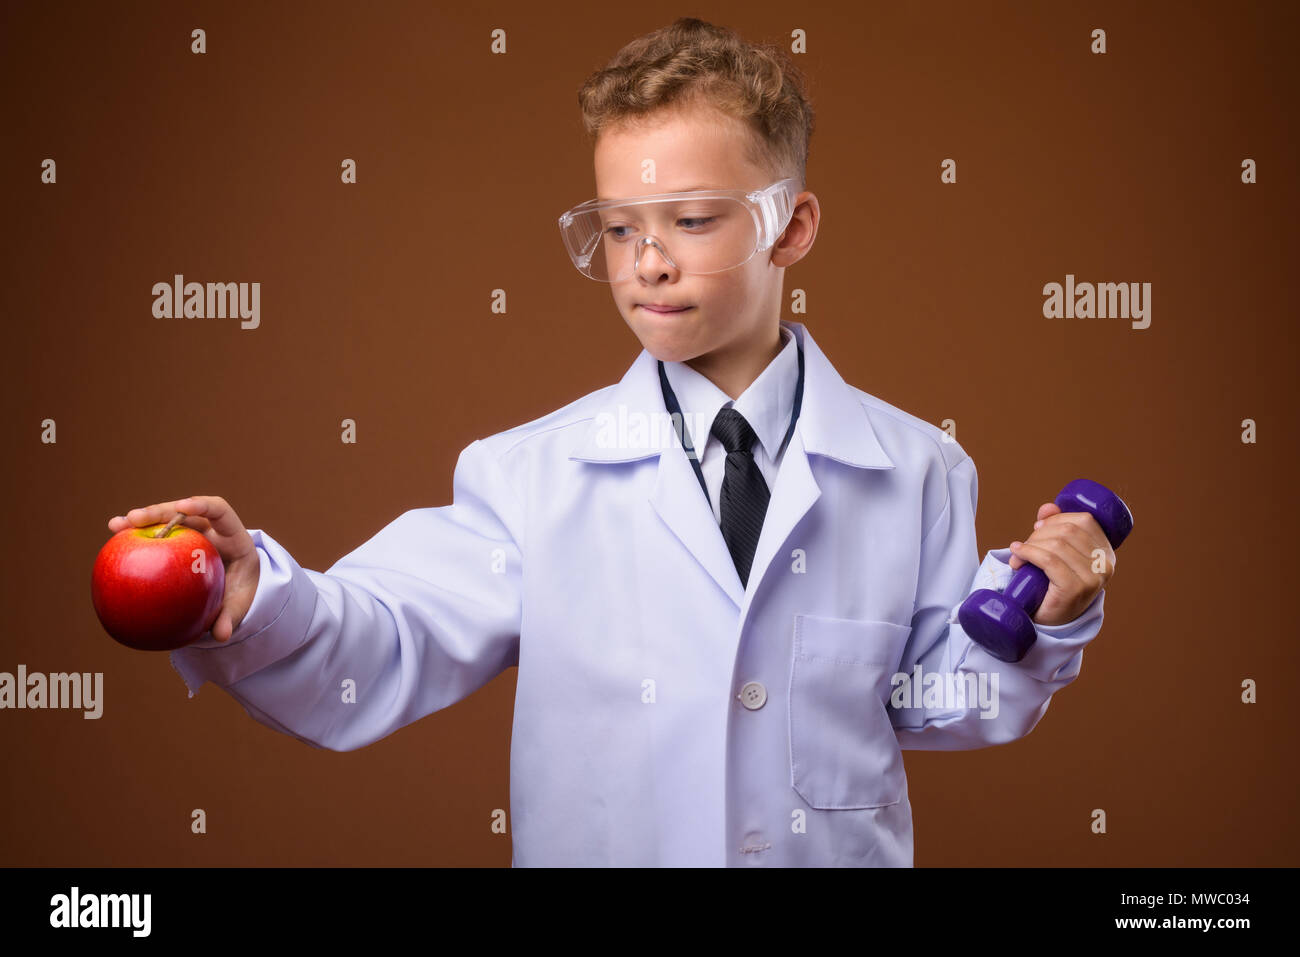 Studio shot of young boy as doctor against brown background Stock Photo